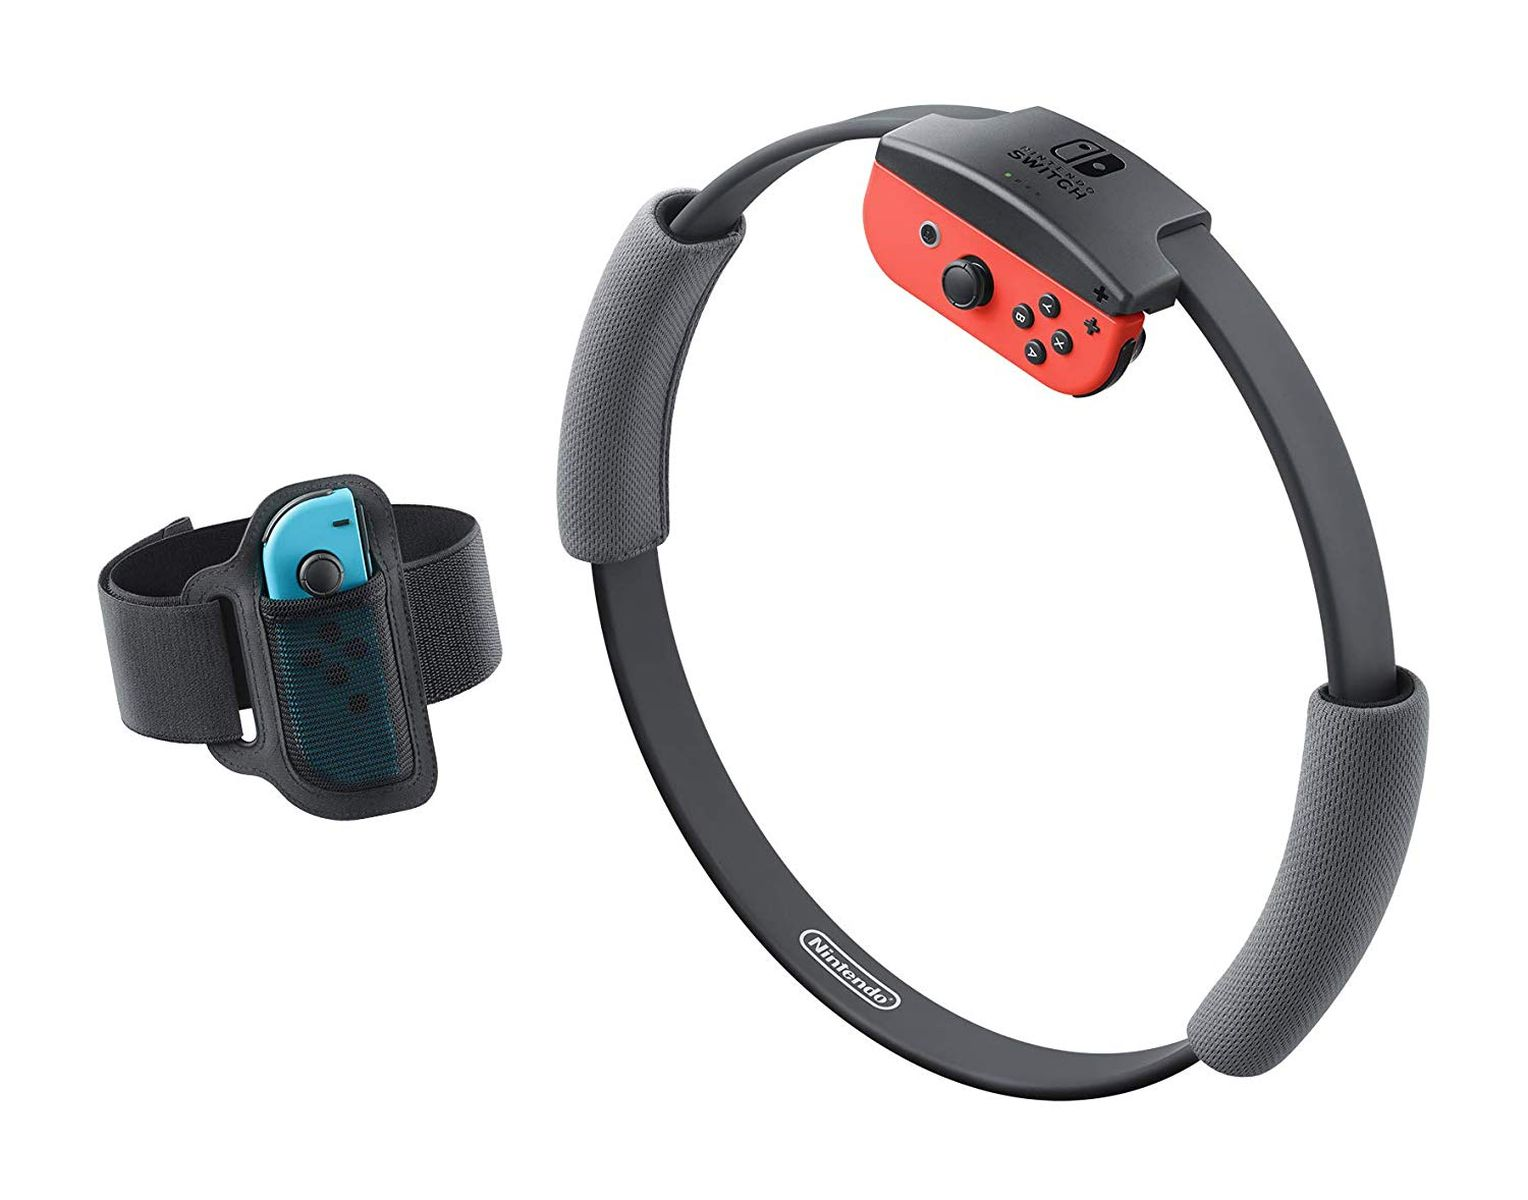 Adventure - Switch] Fit Ring [Nintendo